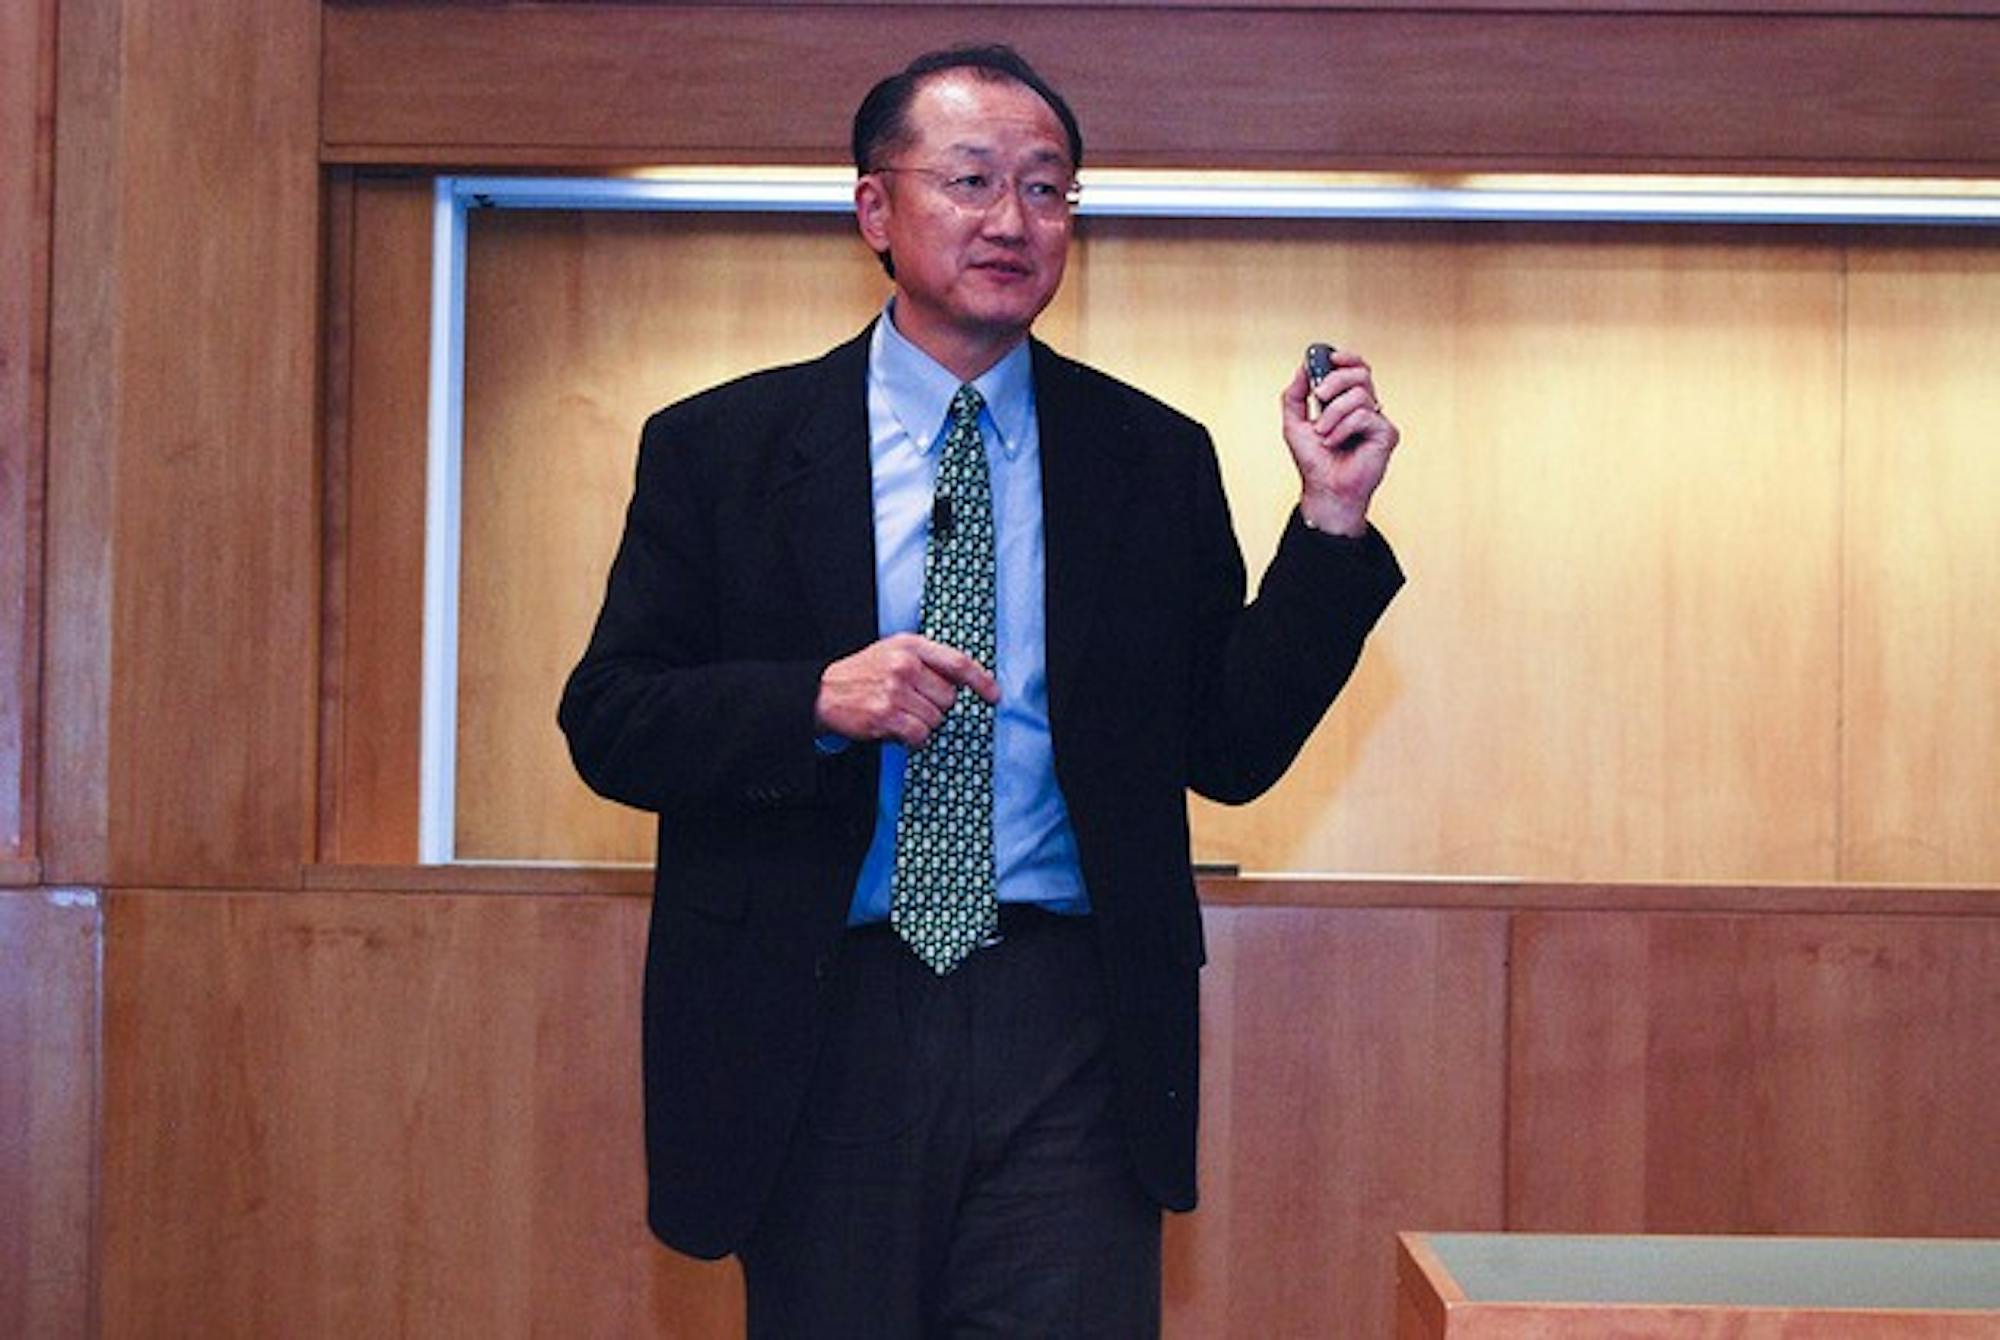 In his interview with the World Bank's board of directors, College President Jim Yong Kim said he will refrain from ideology and offer a fresh perspective.